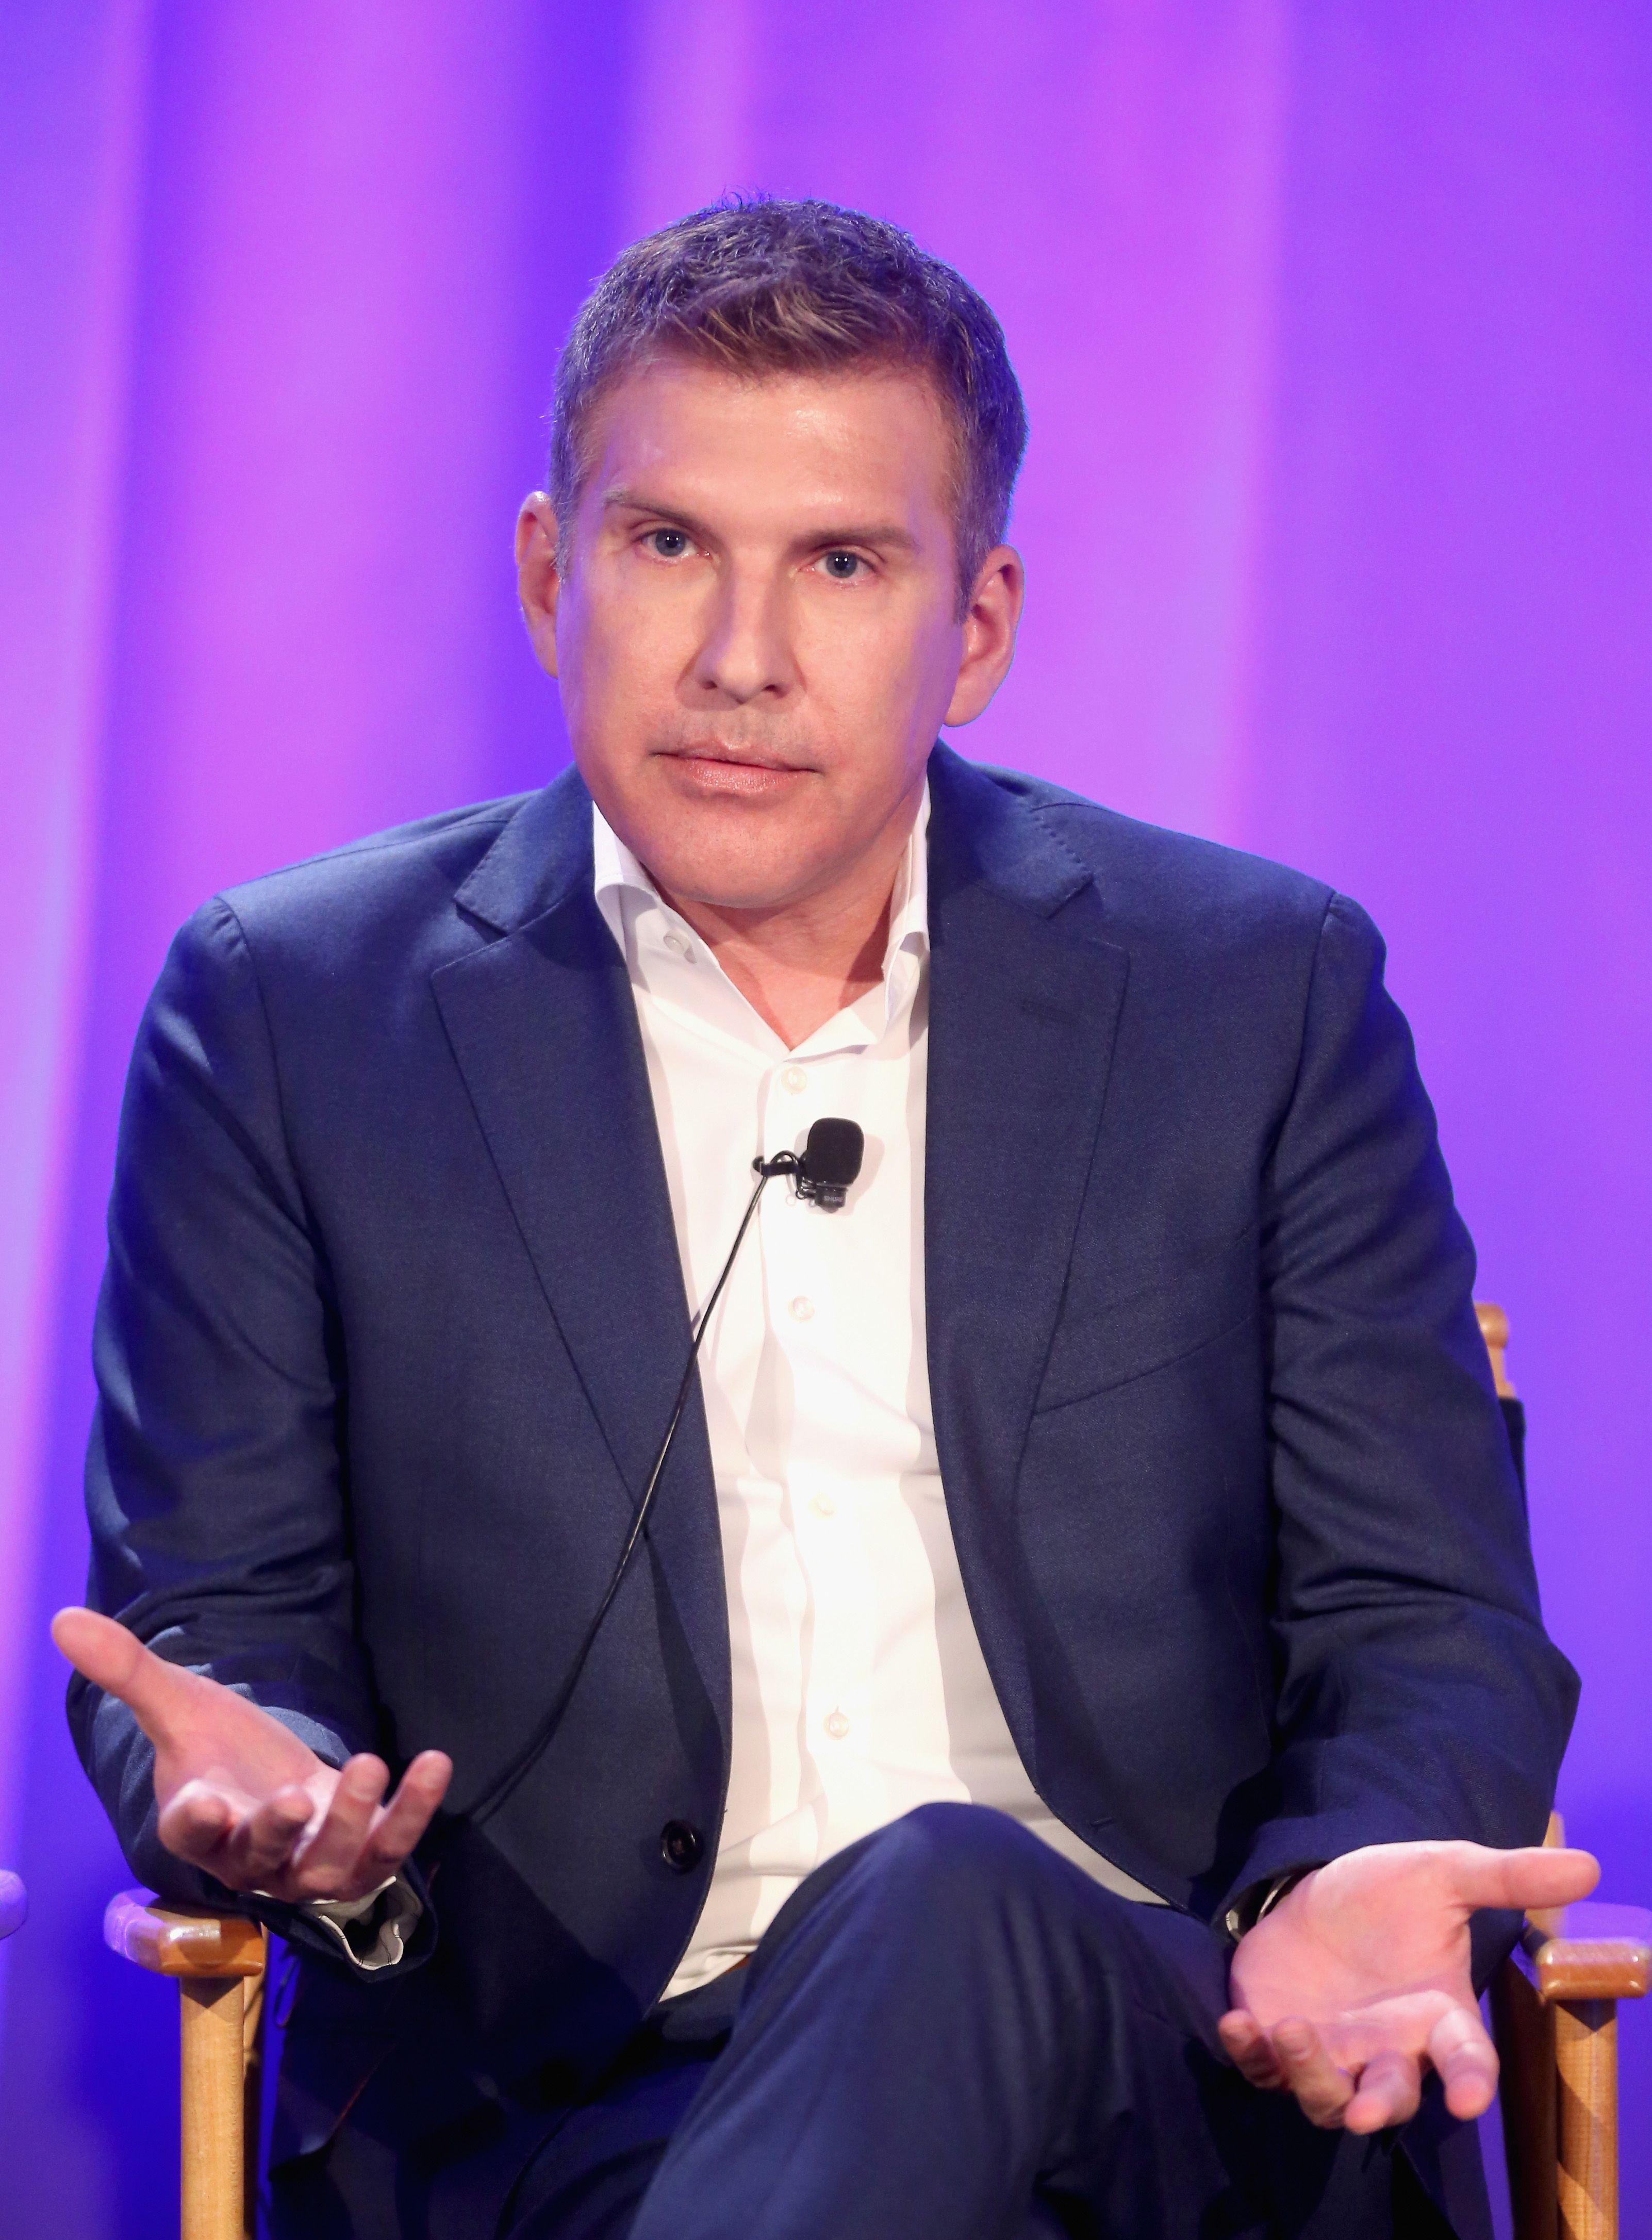 Producer/TV personality Todd Chrisley speaks onstage at the 'Chrisley Knows Best' panel at the 2016 NBCUniversal Summer Press Day at Four Seasons Hotel Westlake Village on April 1, 2016 | Photo: Getty Images